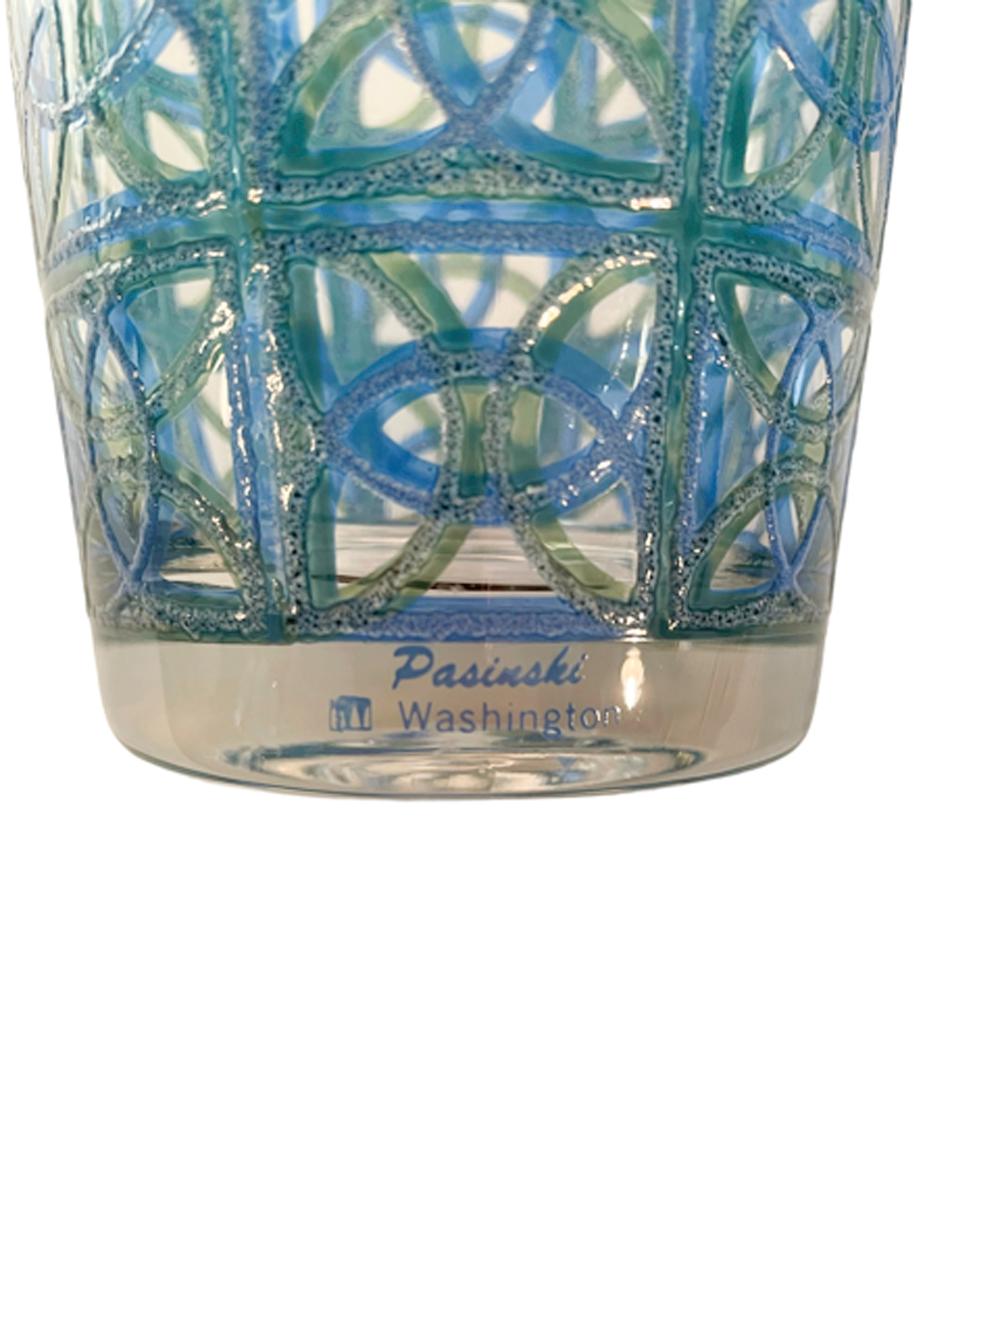 4 Vintage Washington Glass Co. Double Old Fashioned Glasses by Irene Pasinski In Good Condition For Sale In Nantucket, MA